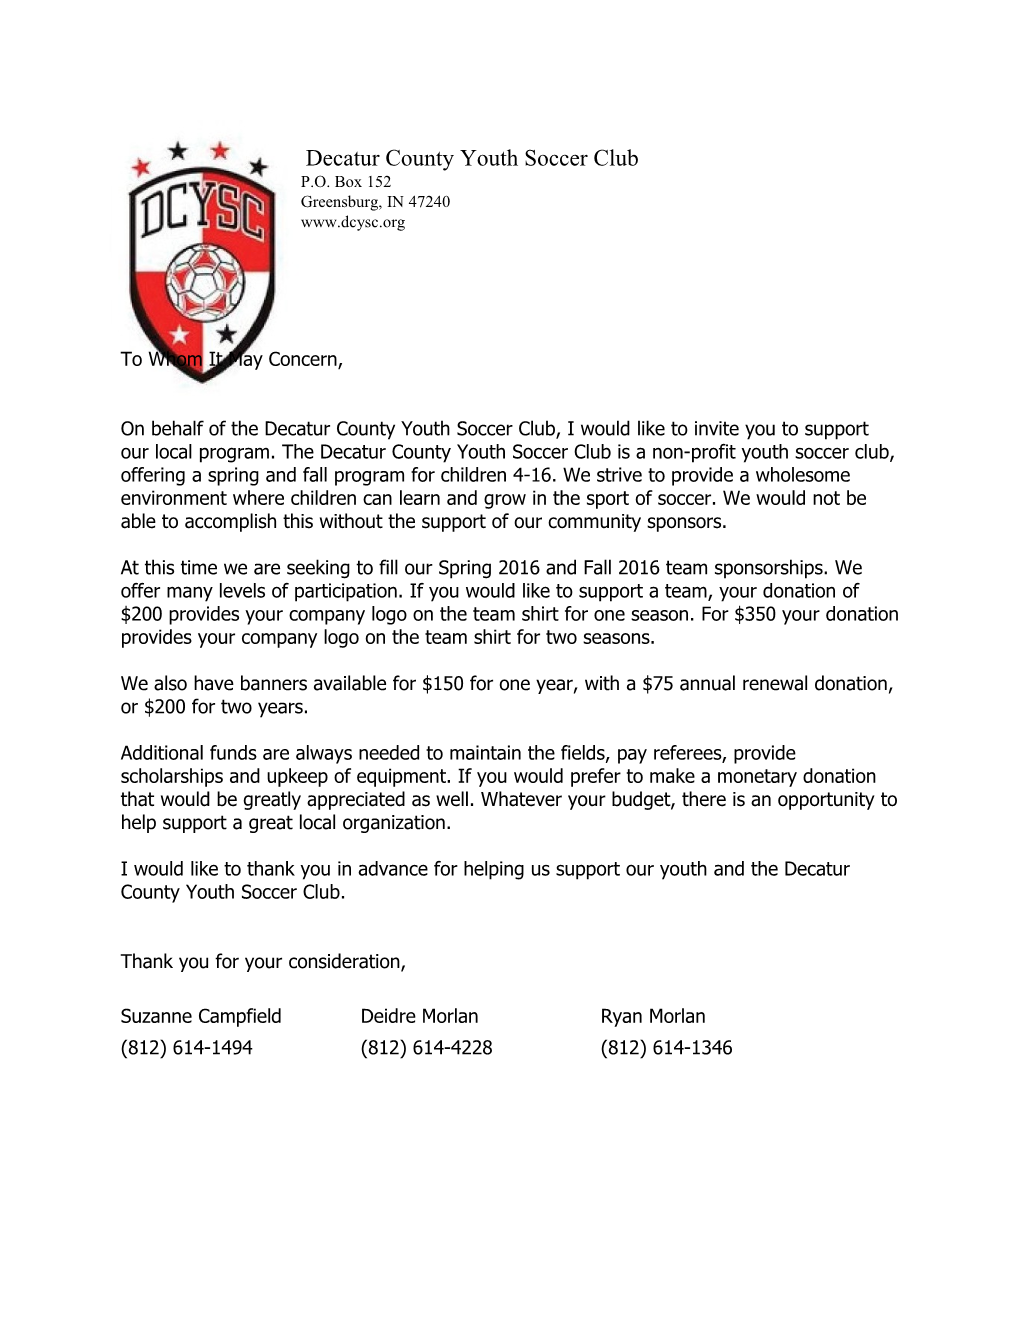 Decatur County Youth Soccer Club